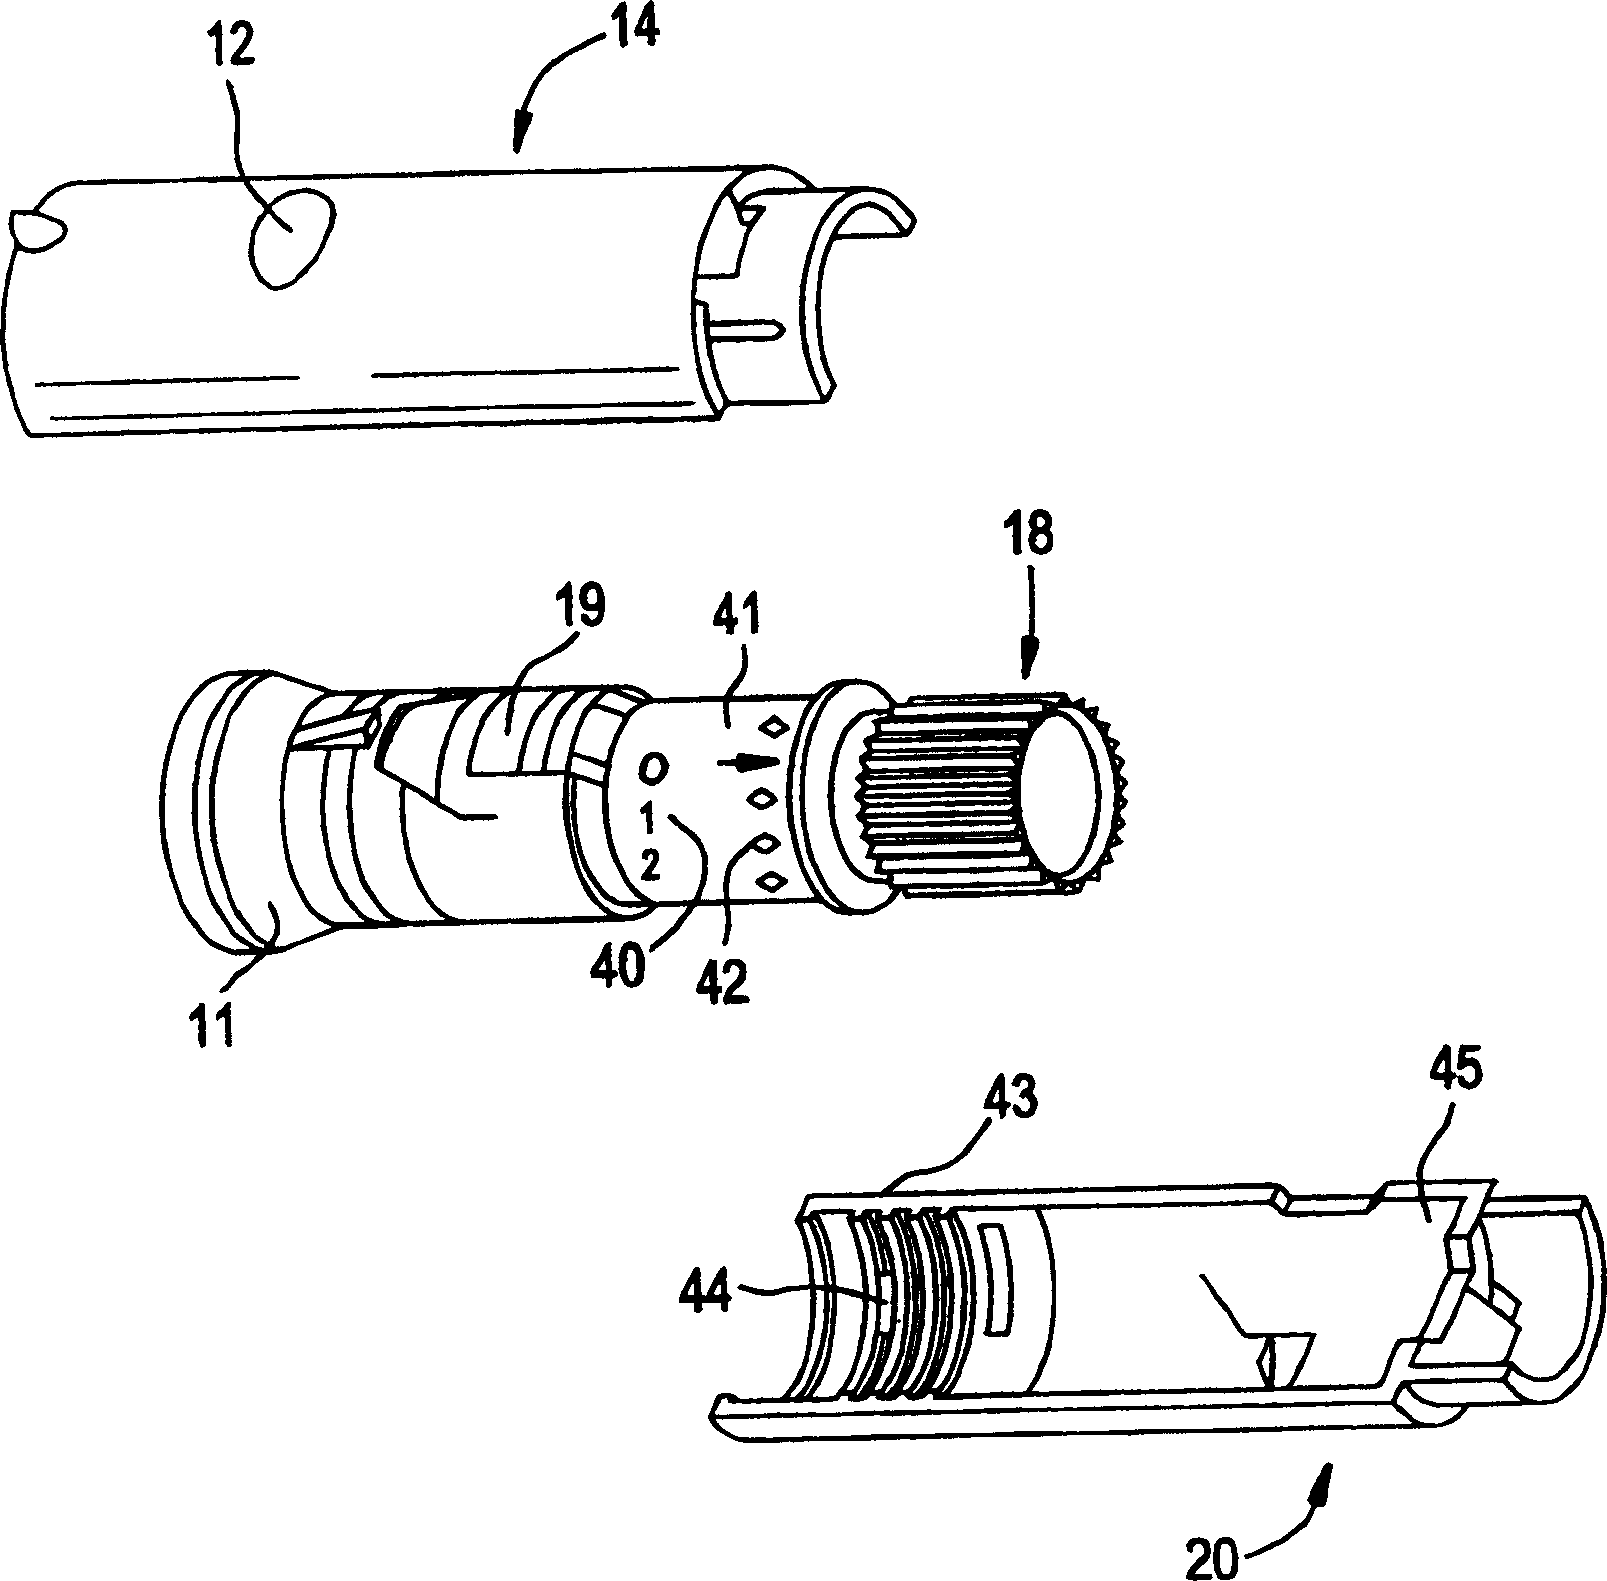 Pen device for administration of parathyroid hormone